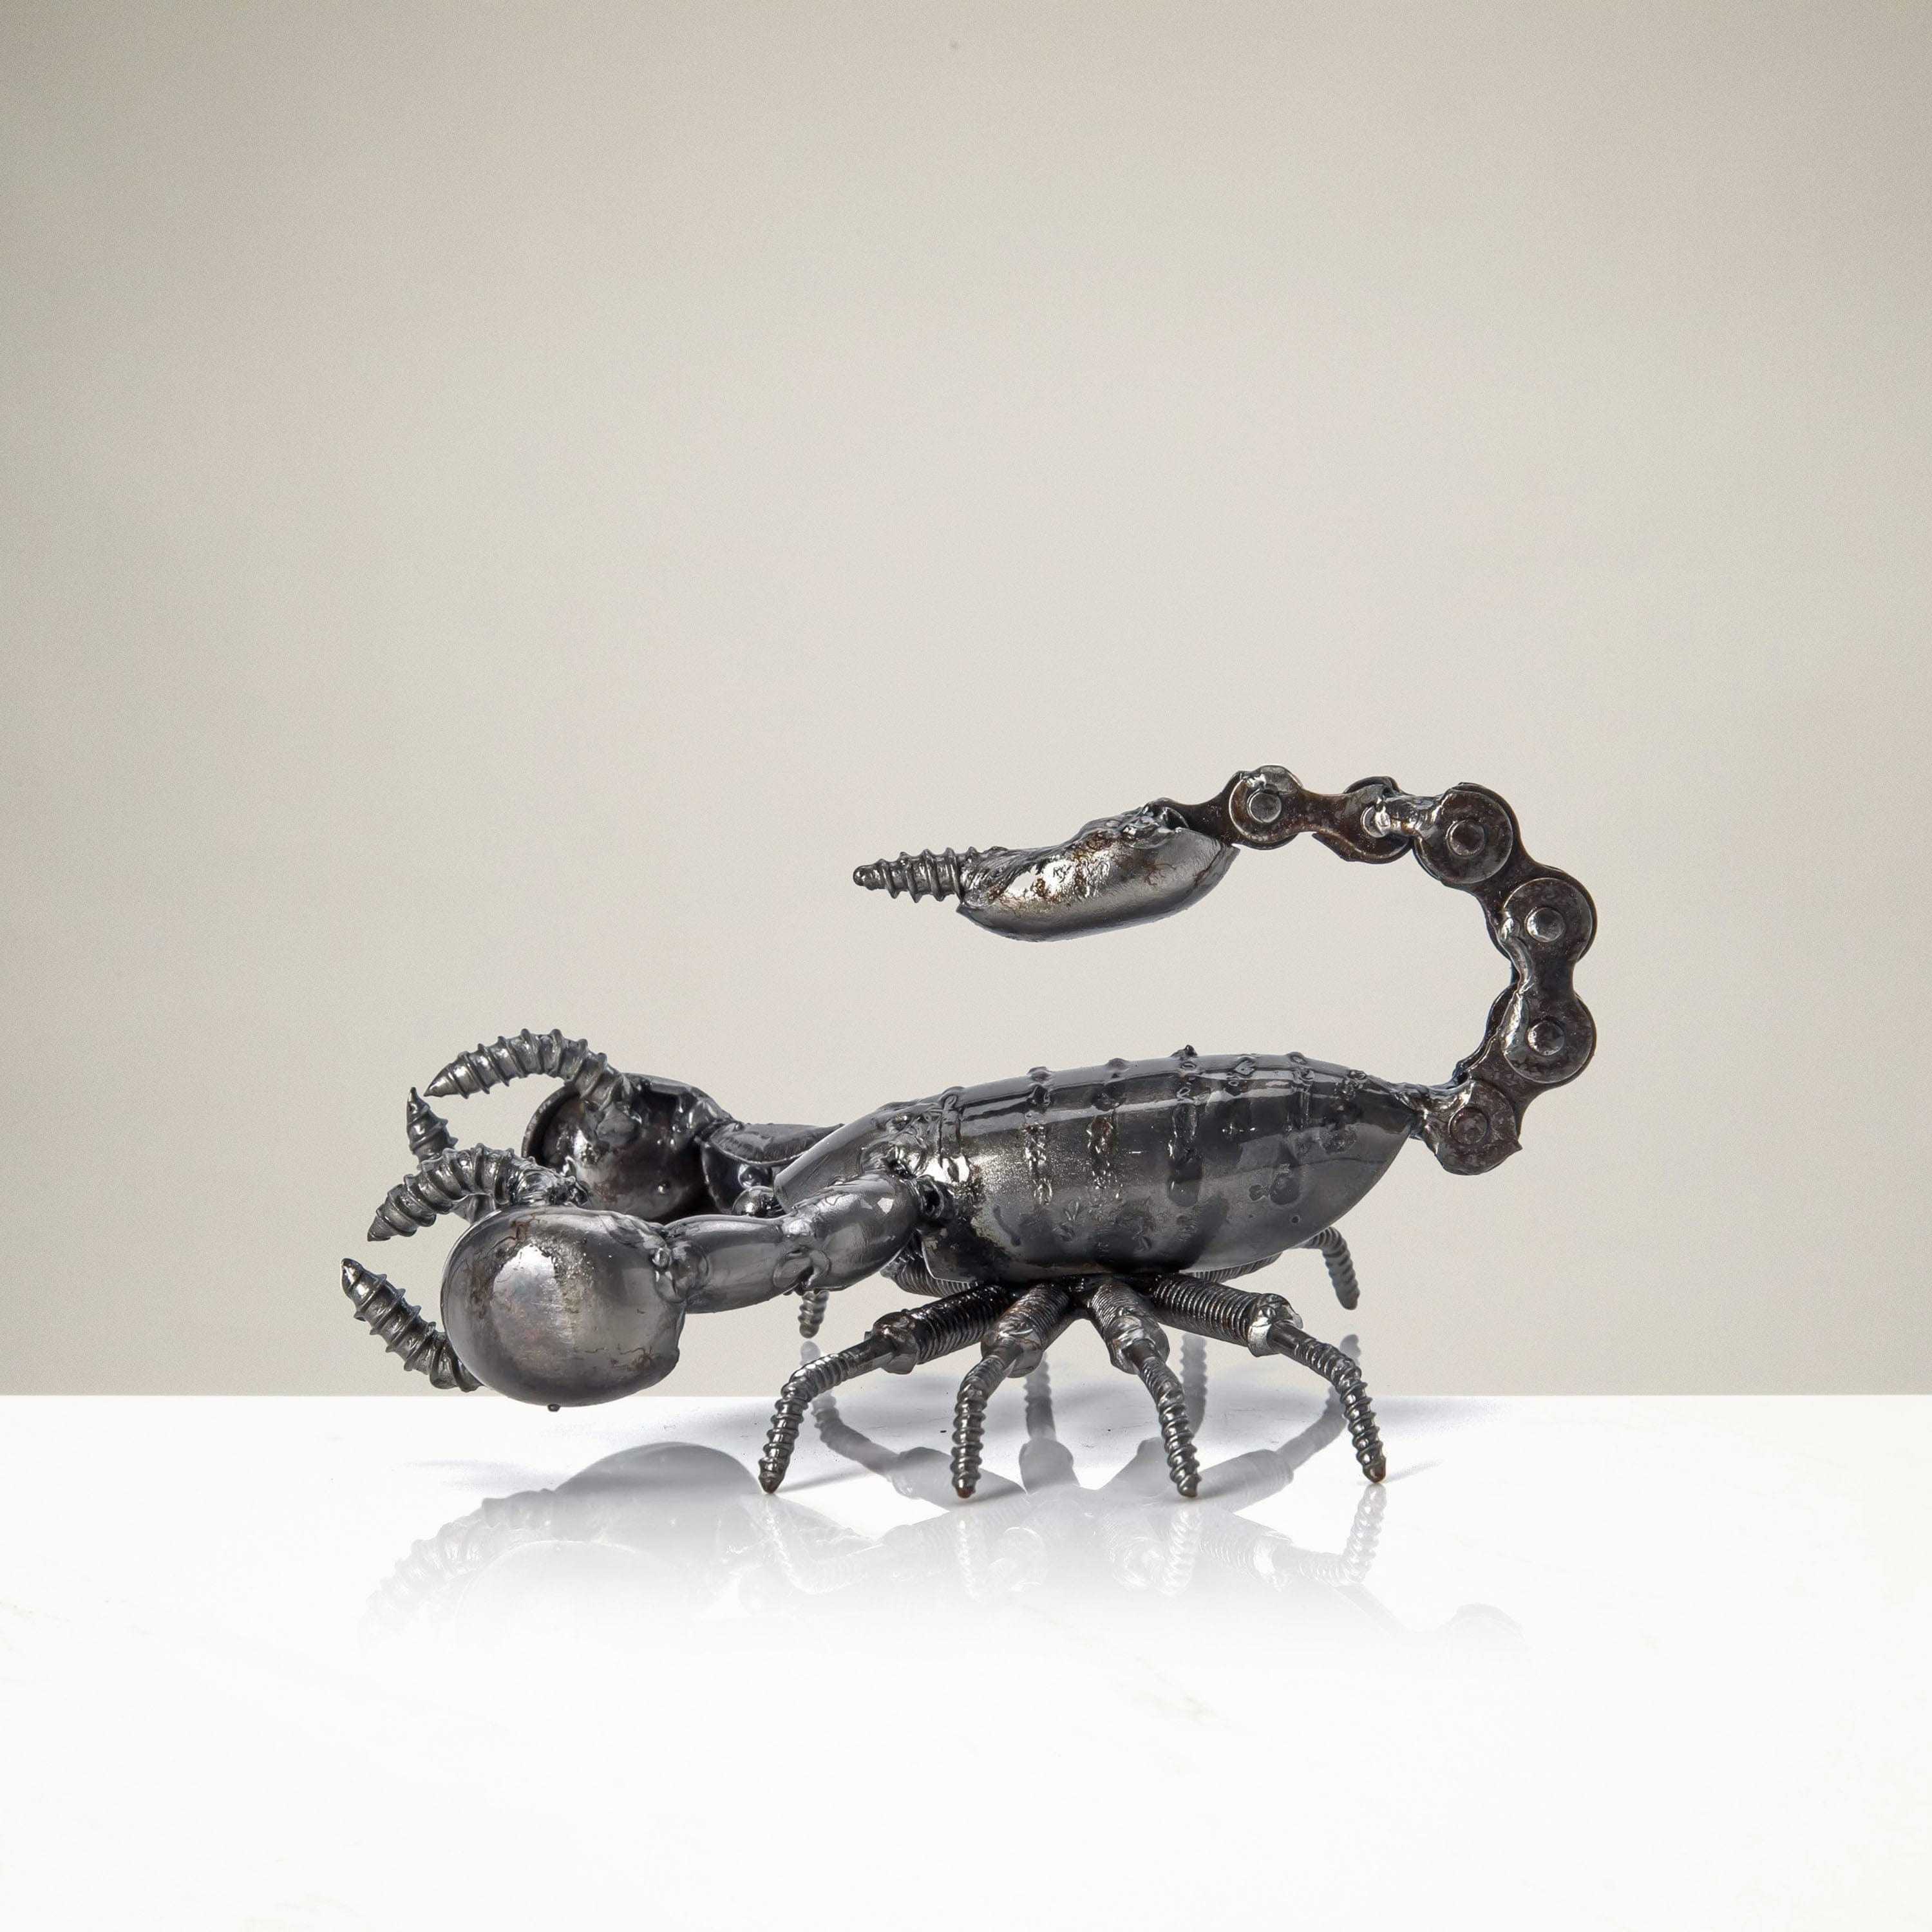 Kalifano Recycled Metal Art Scorpion Inspired Recycled Metal Sculpture RMS-200S-N